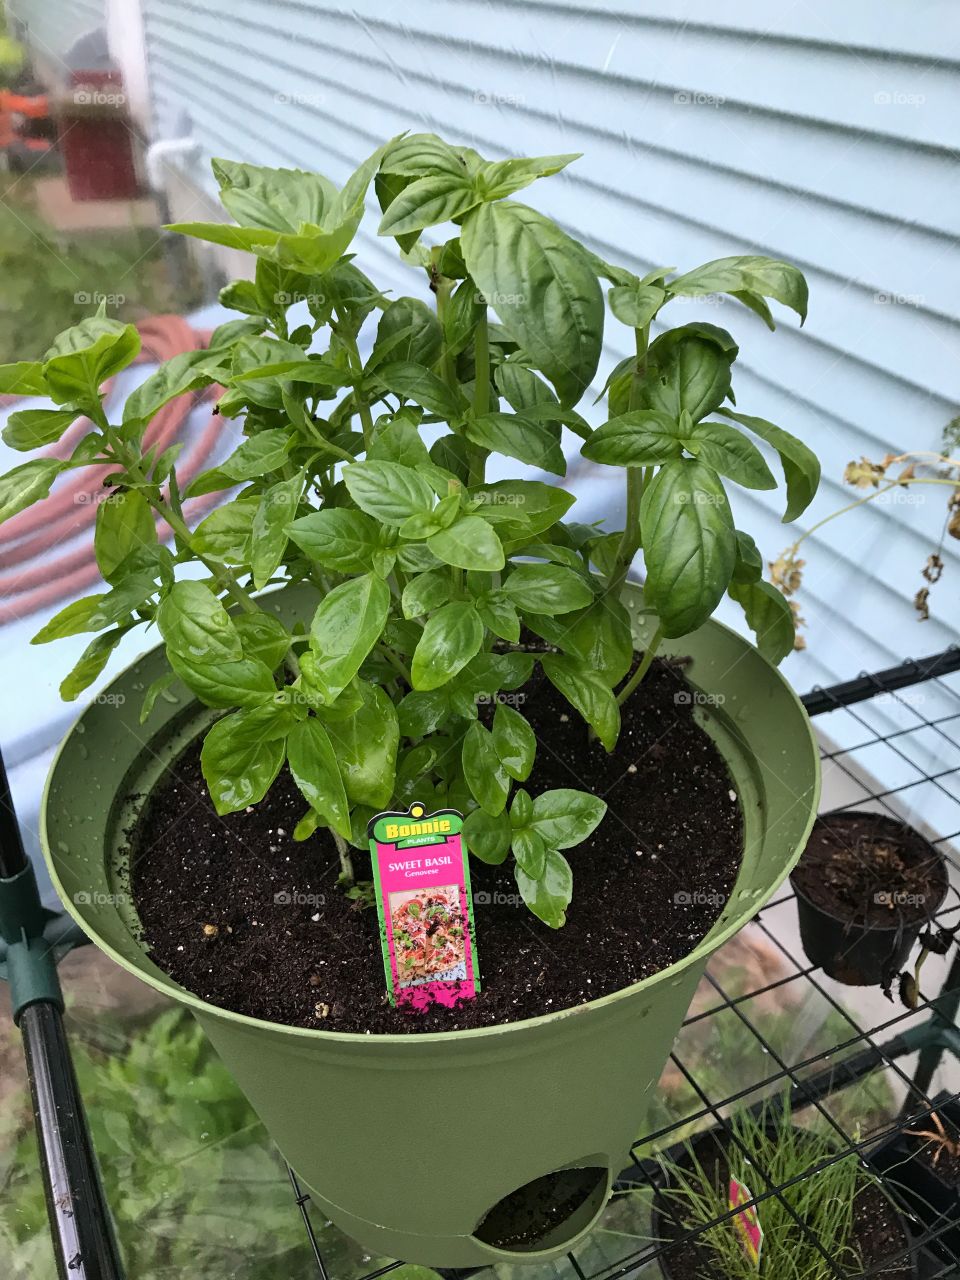 Basil plant growing in greenhouse